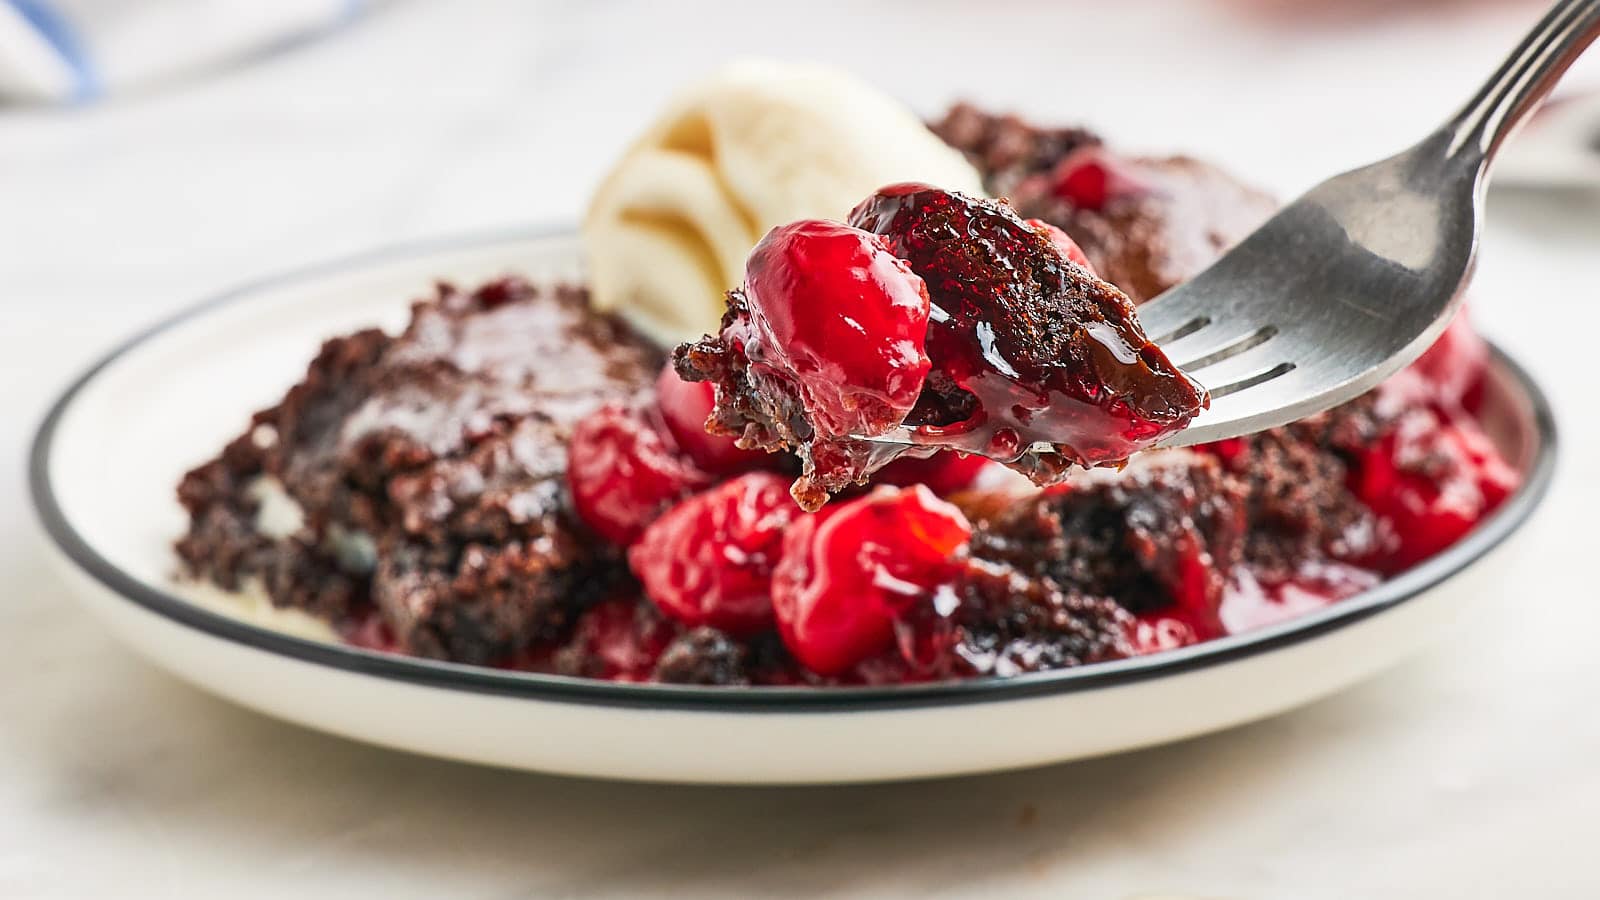 Black Forest Dump Cake recipe by Cheerful Cook.